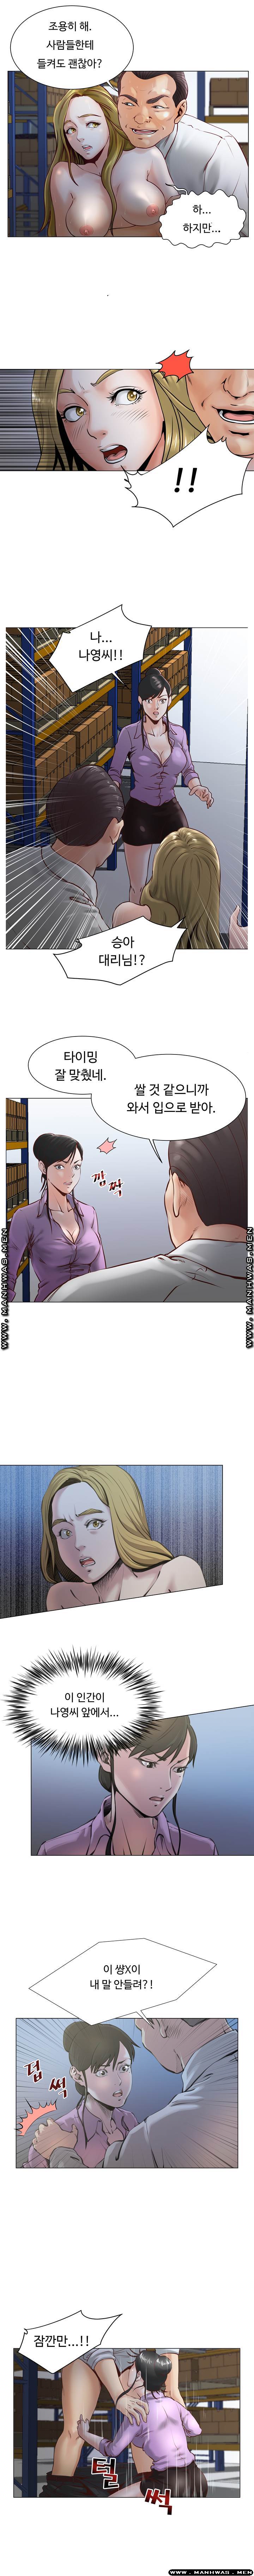 Office Trouble Raw - Chapter 22 Page 2